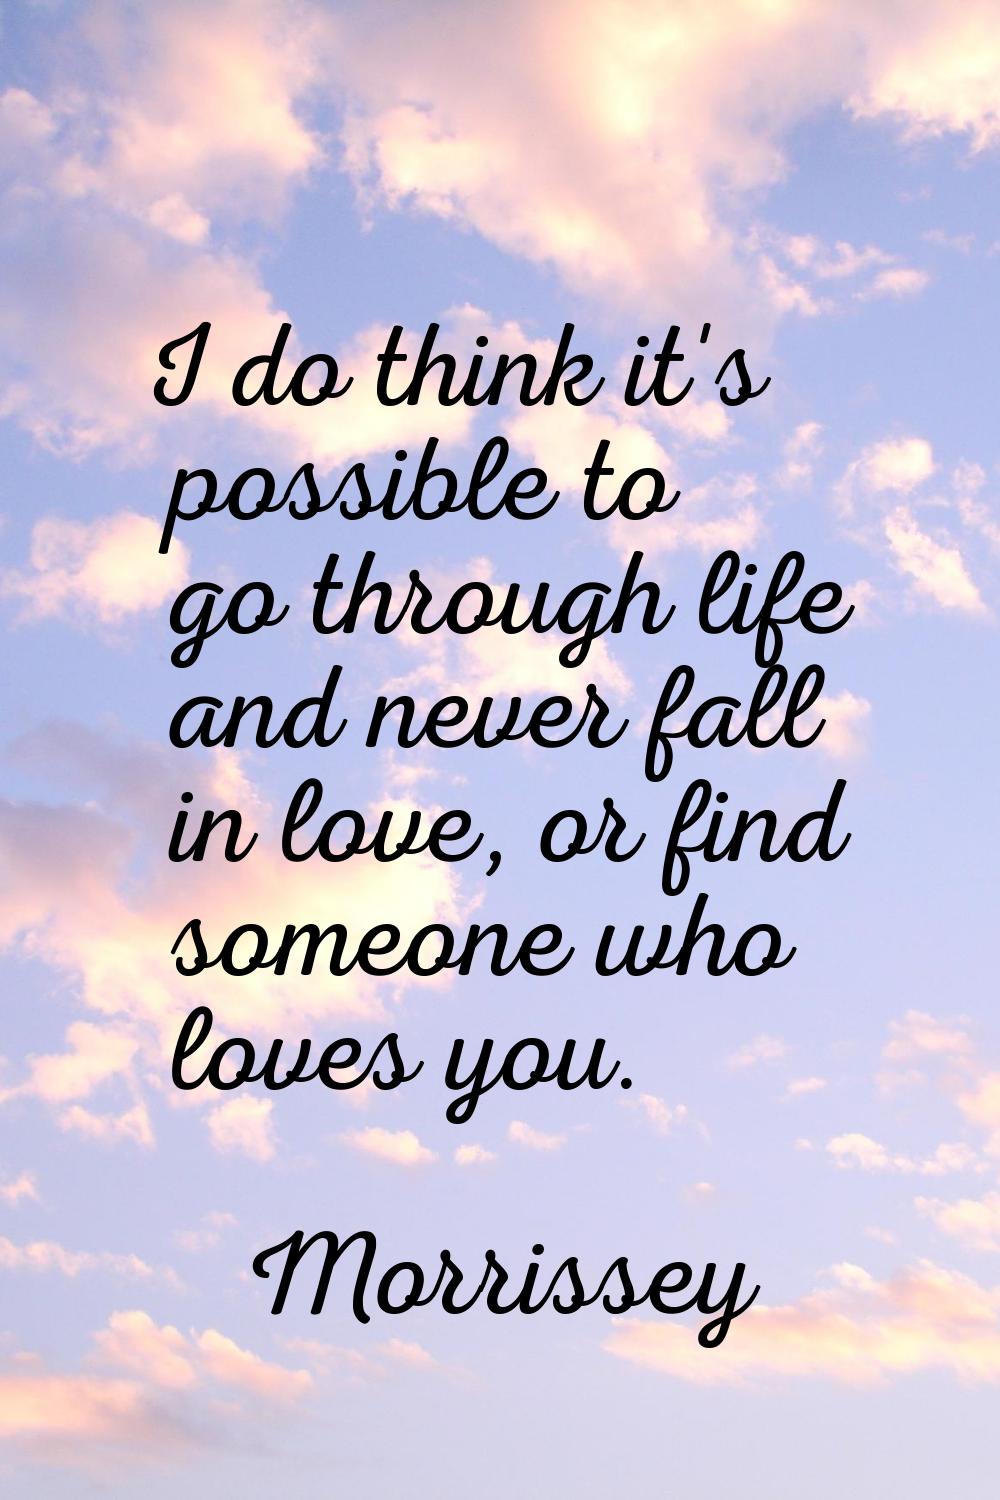 I do think it's possible to go through life and never fall in love, or find someone who loves you.